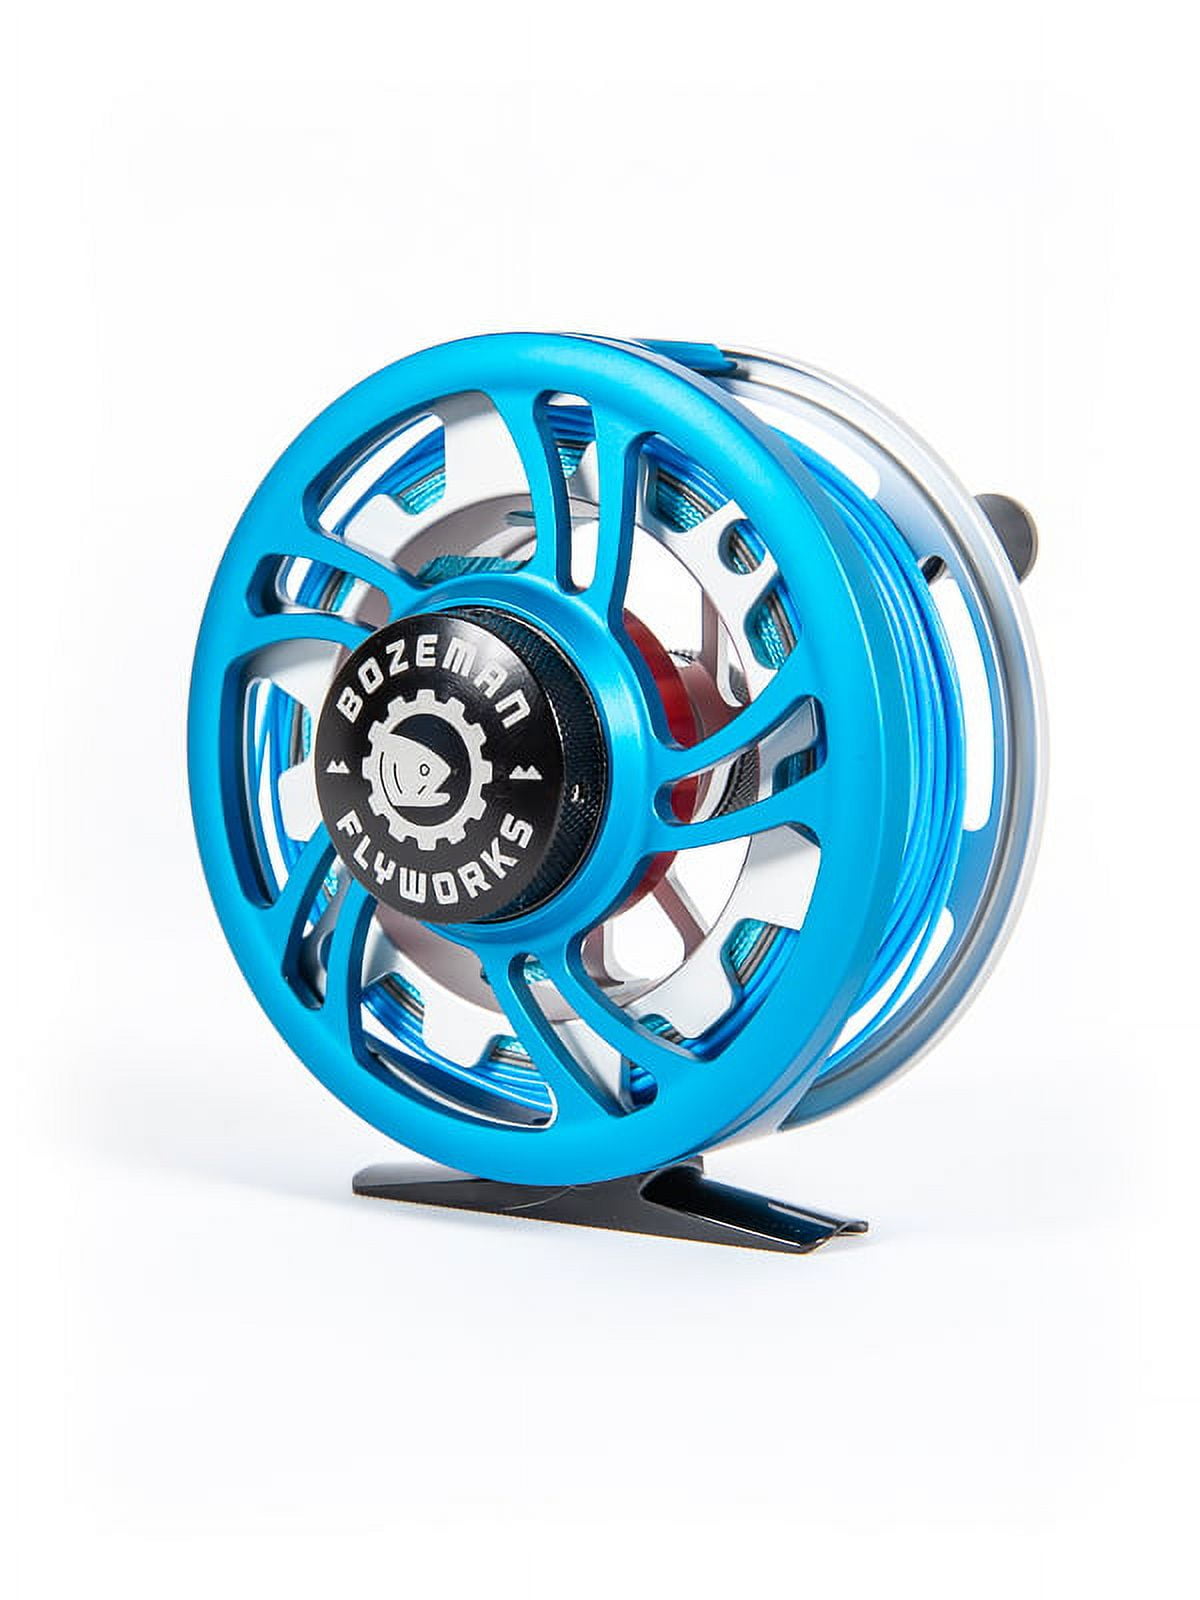 3/4 Fly Reel with 3wt Fly Line and Backing - The Patriot - Bozeman